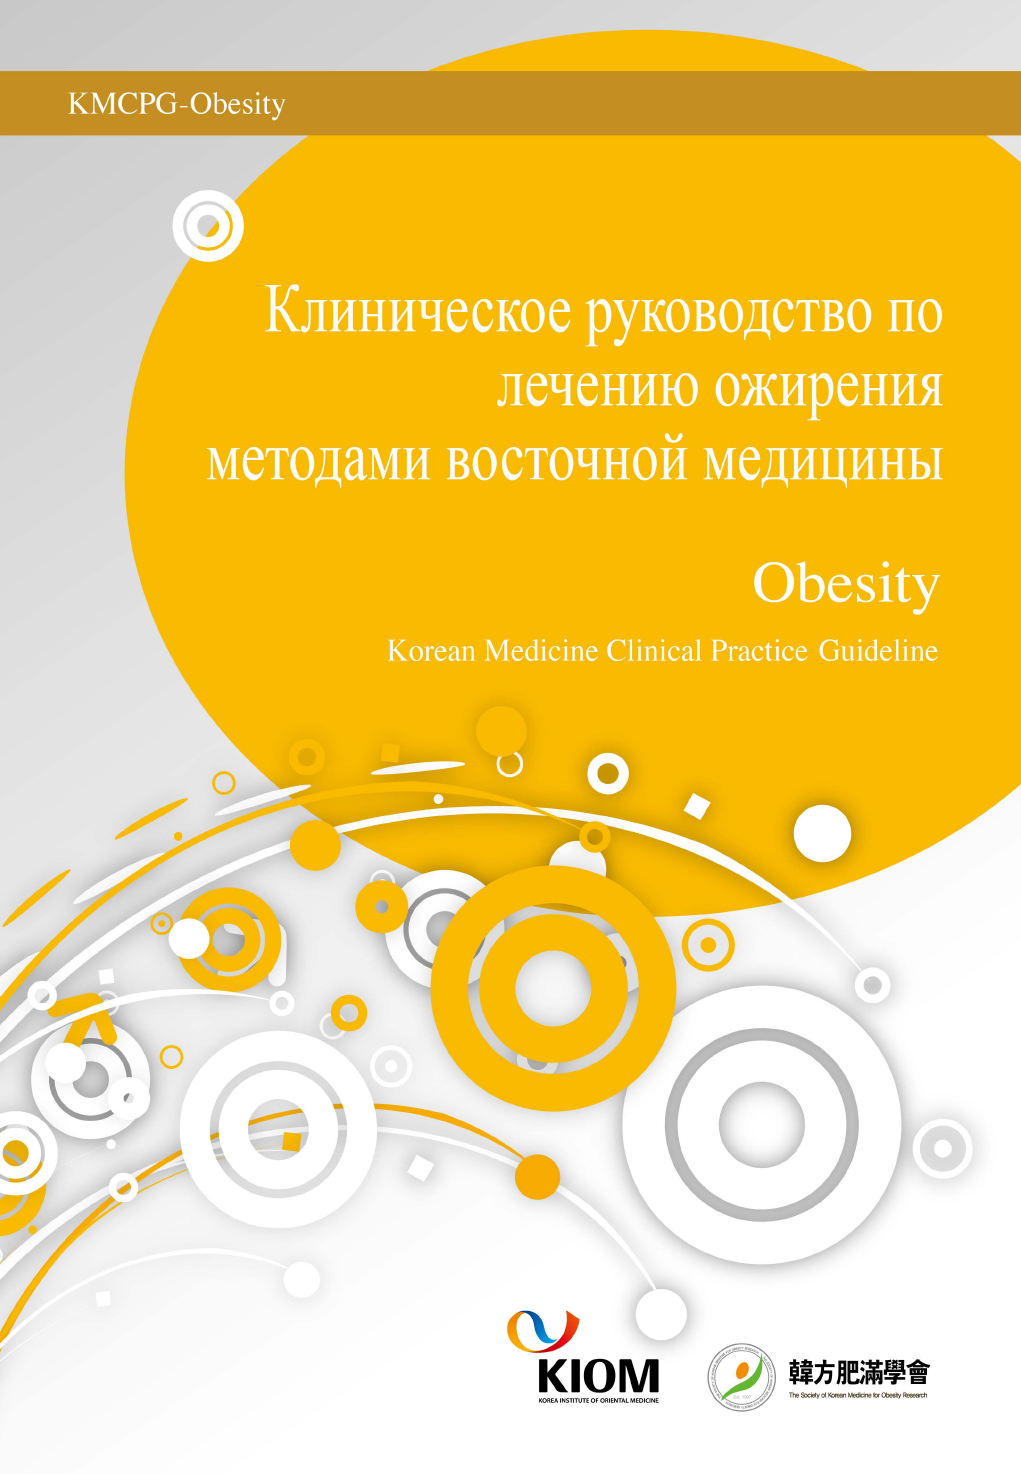 KM Clinical Practice Guideline on Obesity - Russian Version